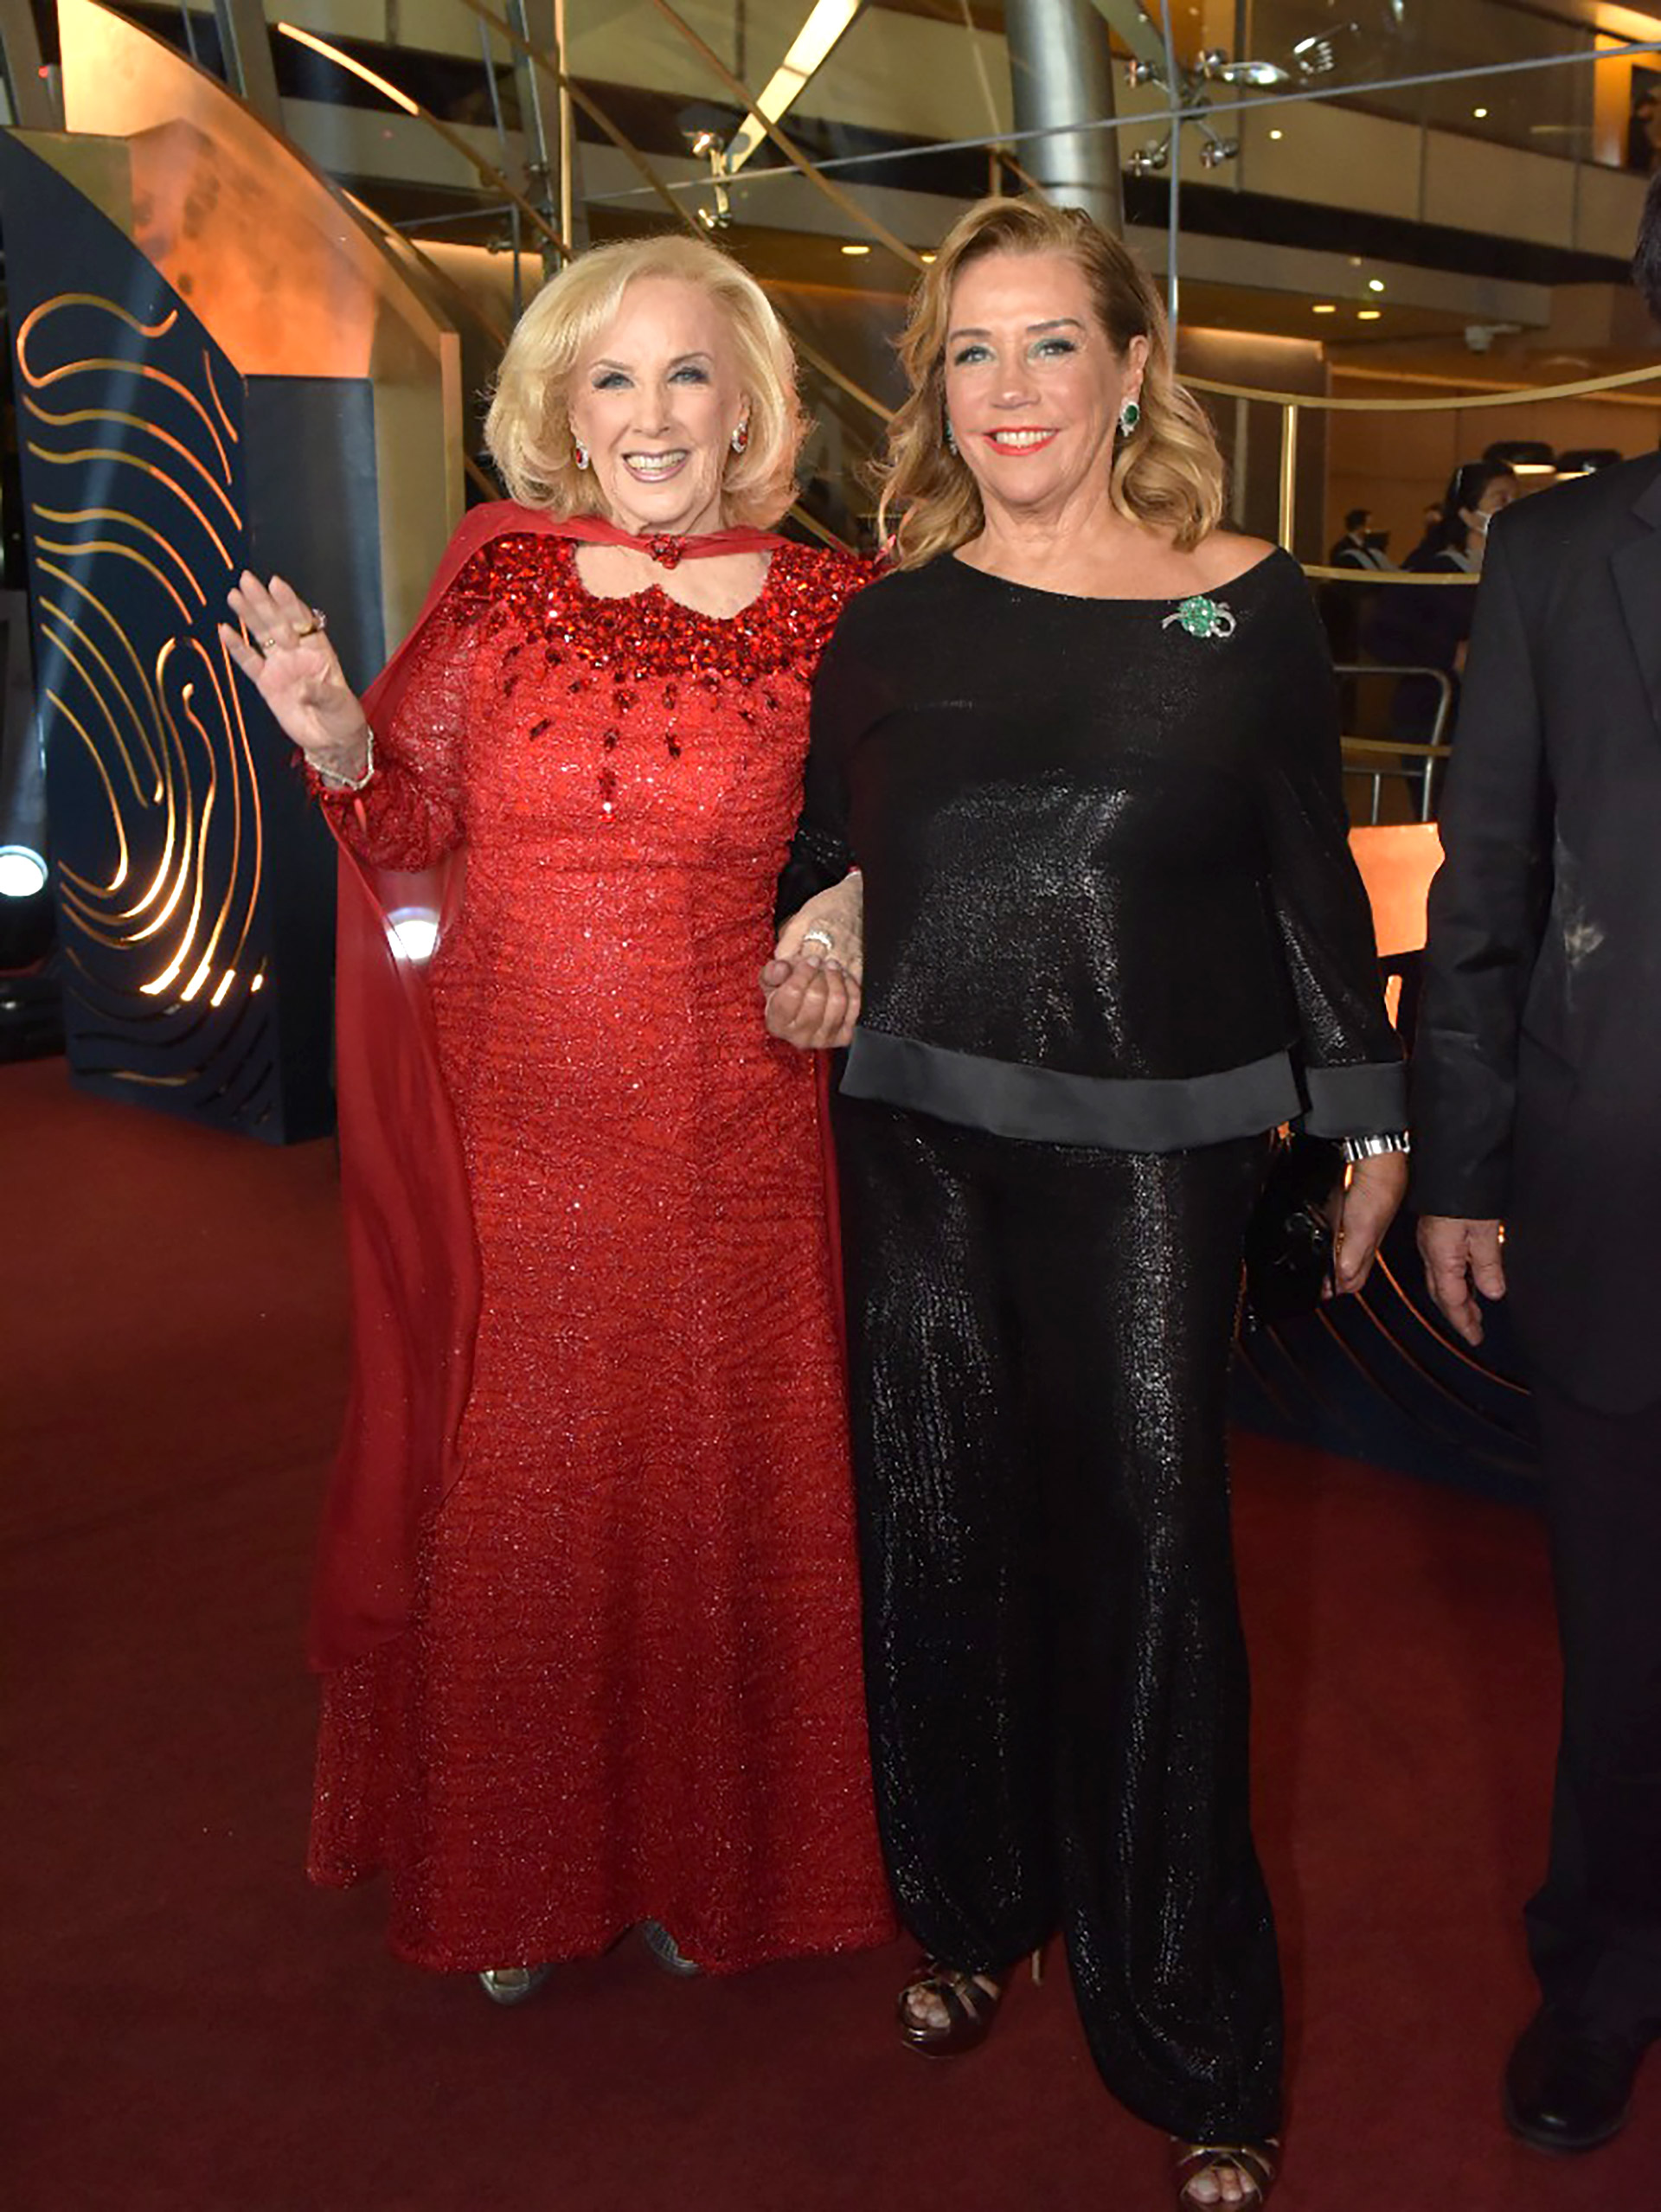 Mirtha Legrand, as well as her daughter Marcela Tinayre, her granddaughter Juana Viale and her great-granddaughter, Ámbar de Benedictis, were present at the famous evening which rewards the best of Argentine television (Gustavo Gavotti)